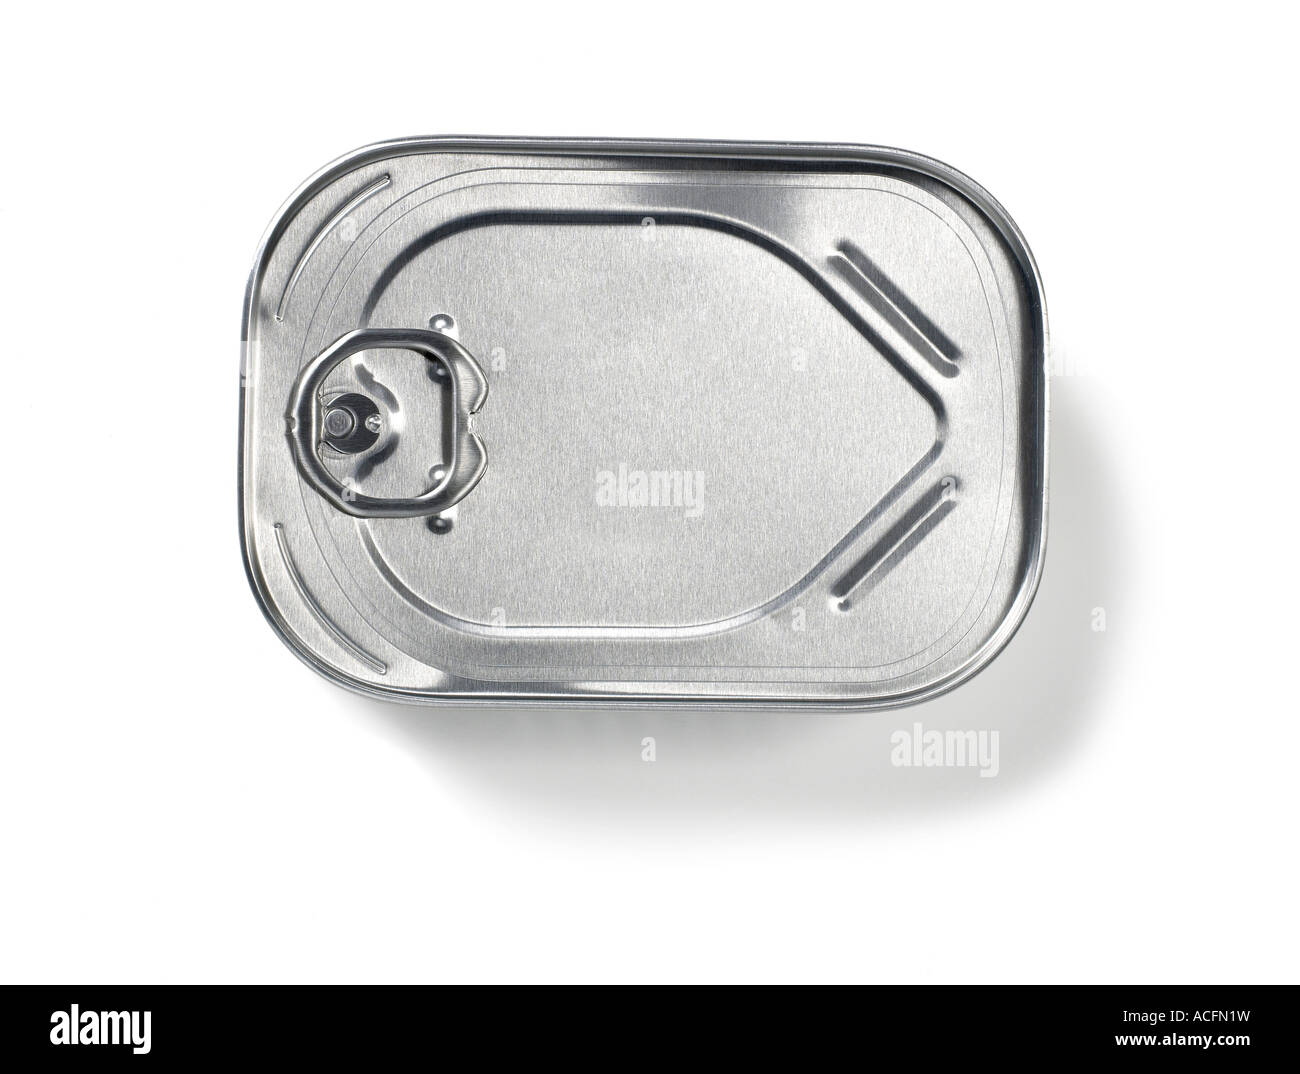 Sardine Can elevated view Stock Photo